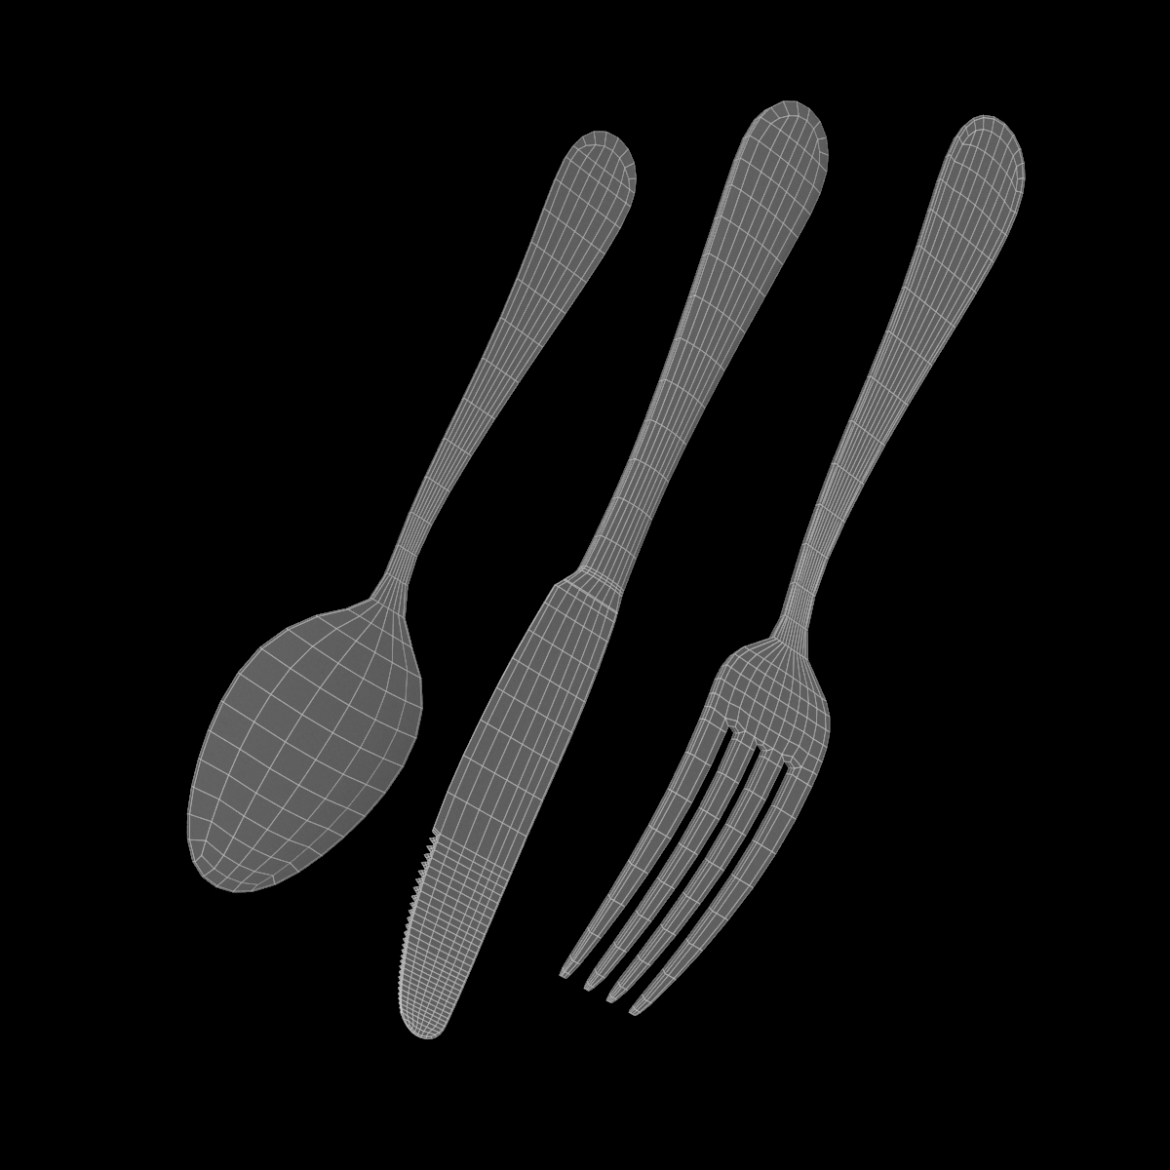  <a class="continue" href="https://www.flatpyramid.com/3d-models/furniture-3d-models/cookware-and-tableware/utensils/dessert-knife-fork-spoon-common-cutlery/">Continue Reading<span> Dessert Knife Fork Spoon Common Cutlery</span></a>